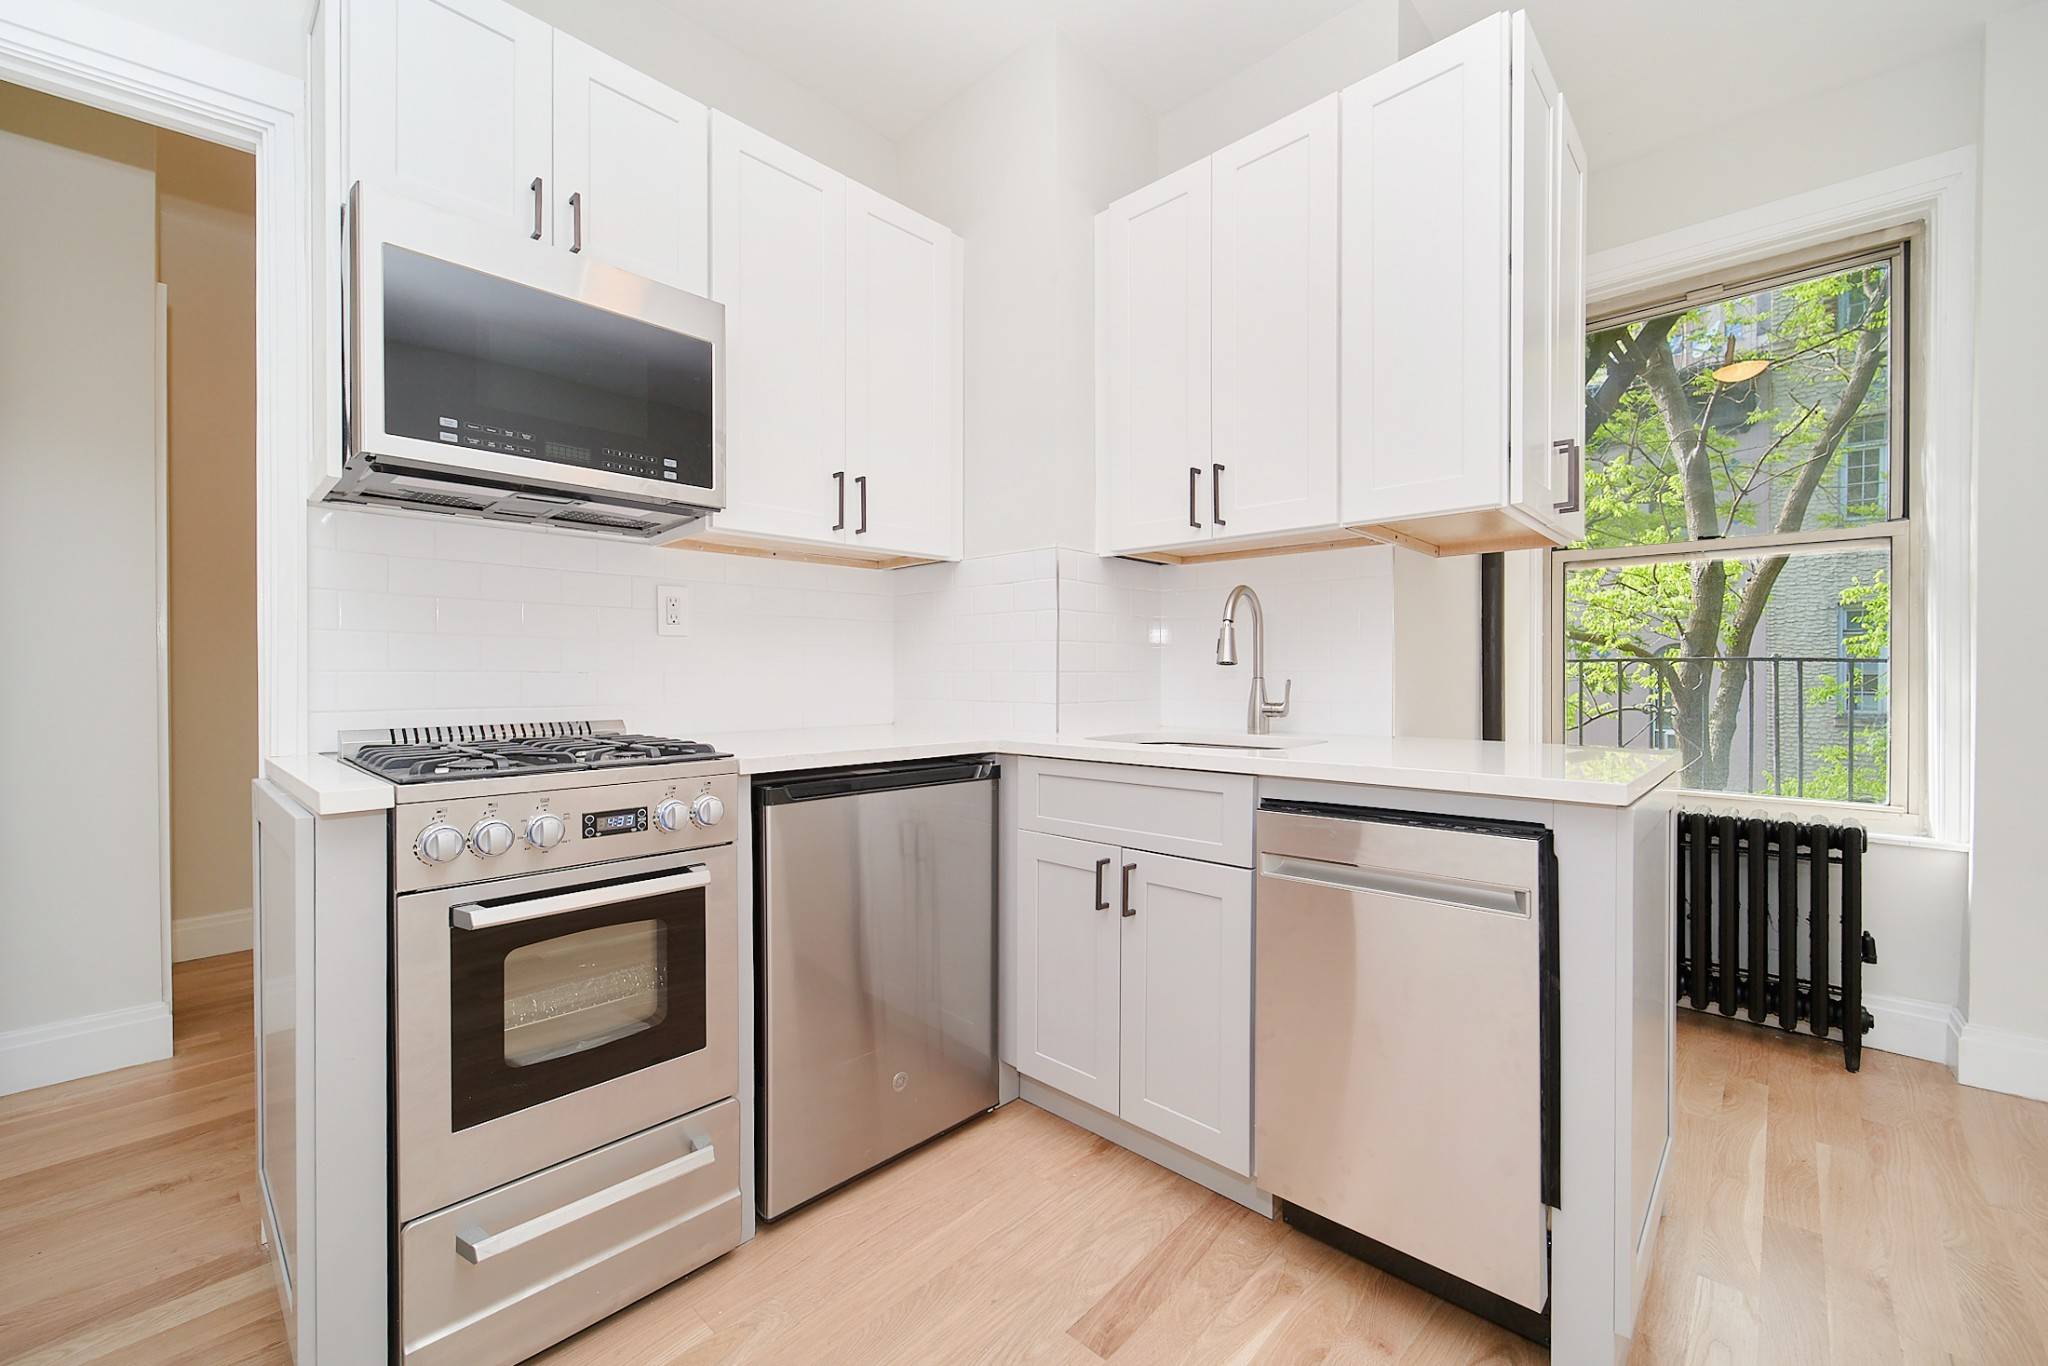 Beautiful 1BR in the heart of the West VillageApartment Details Bright windows Gut Renovation with SS Appliances including Dishwasher Strip Wood Flooring Marble FinishesBuilding Amenities Neighborhood Super Well Maintained Walkup ...